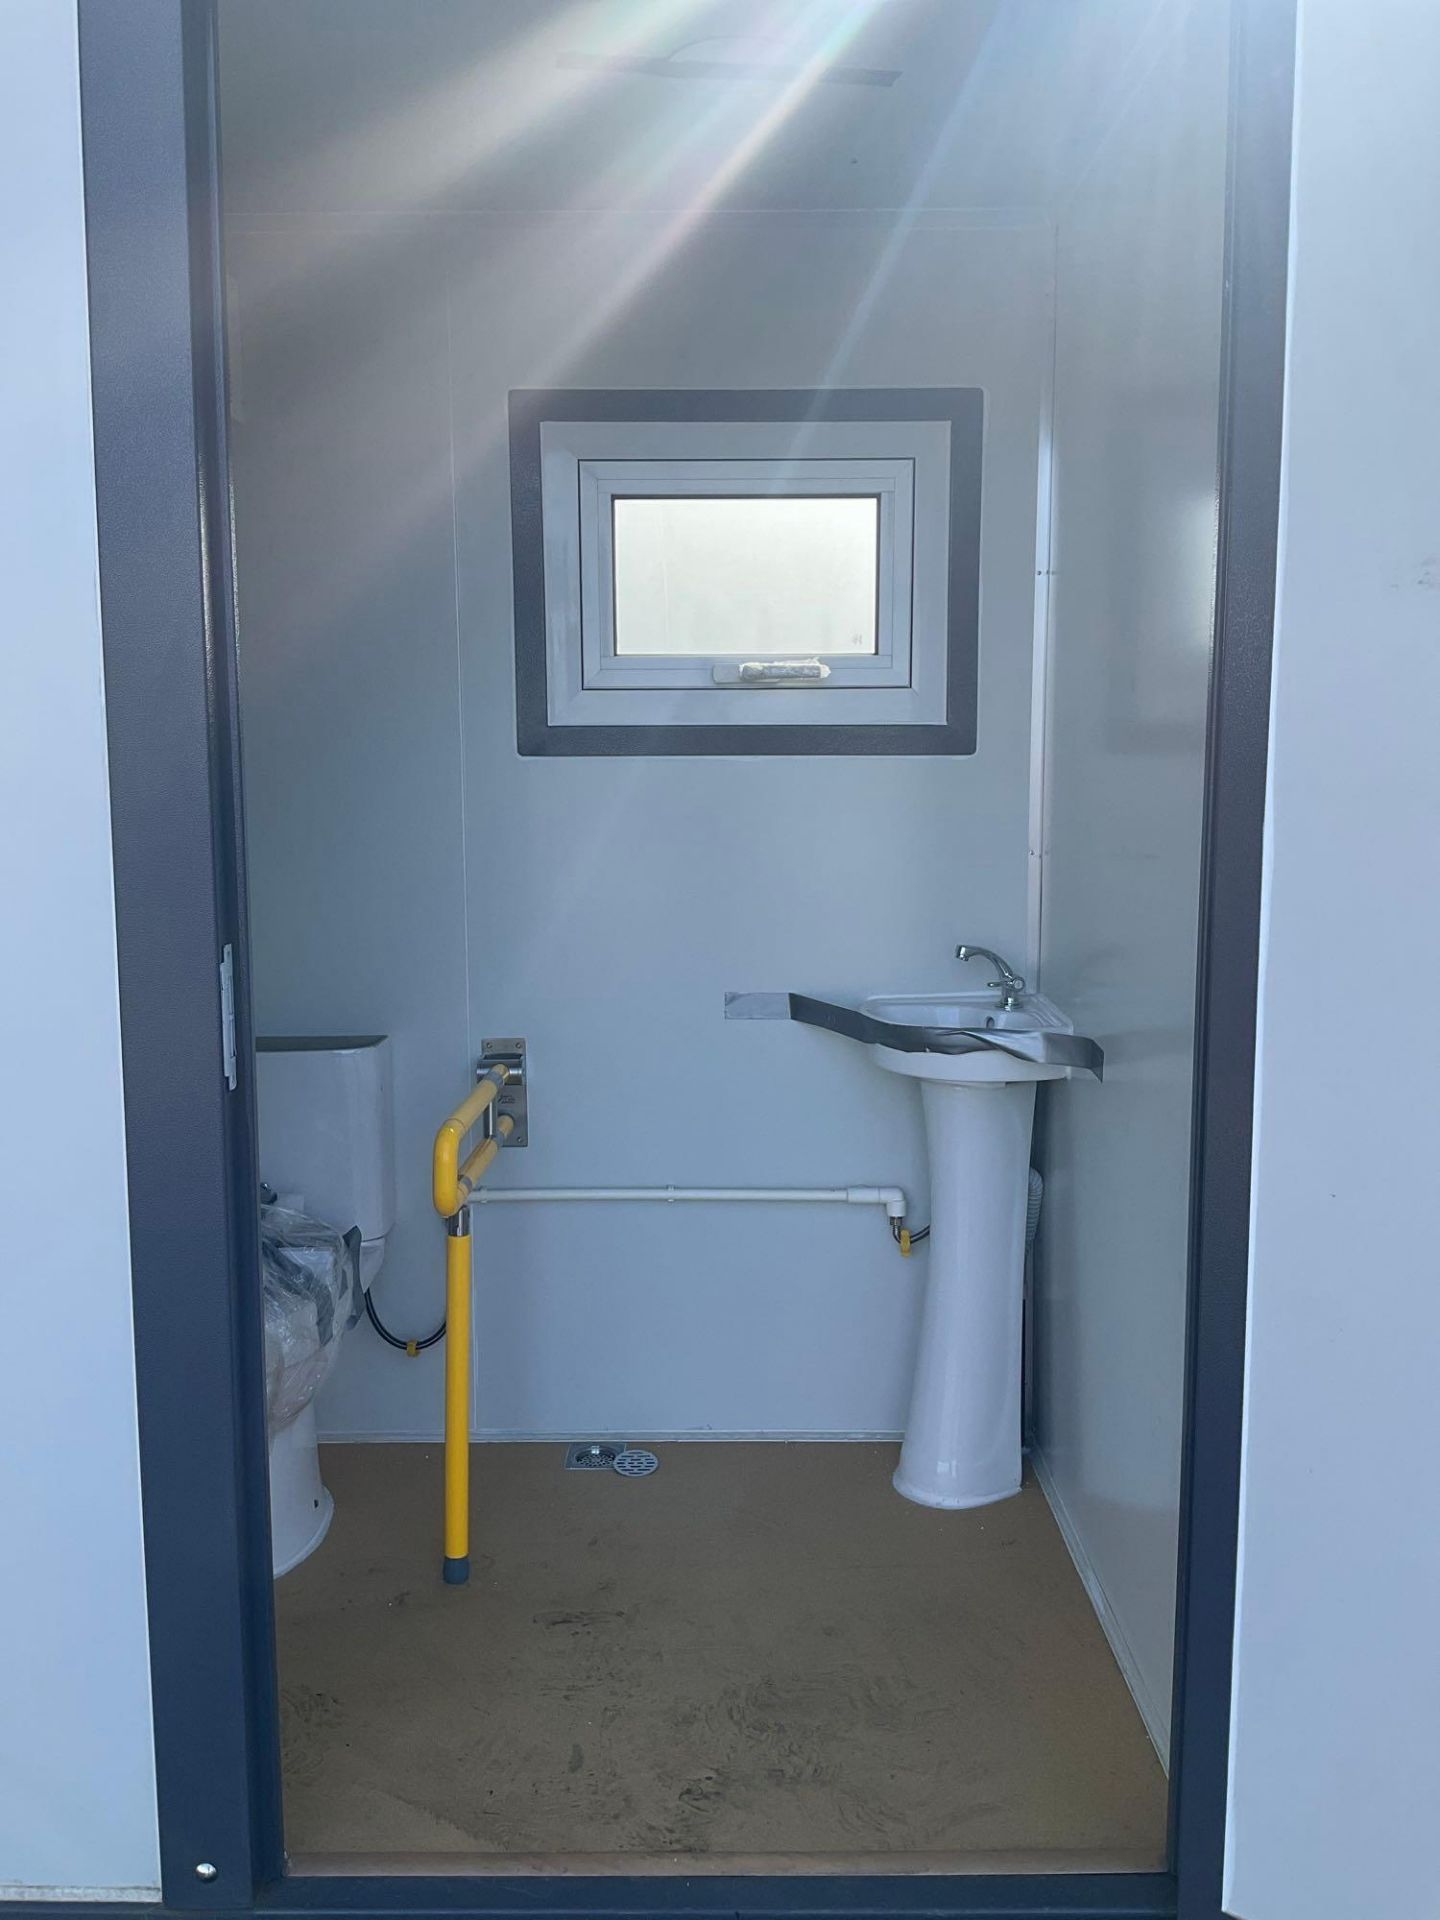 UNUSED PORTABLE BATHROOM UNIT WITH RAMP/HANDICAP ACCESSIBLE, ELECTRIC & PLUMBING HOOK UP WITH EX - Image 9 of 12